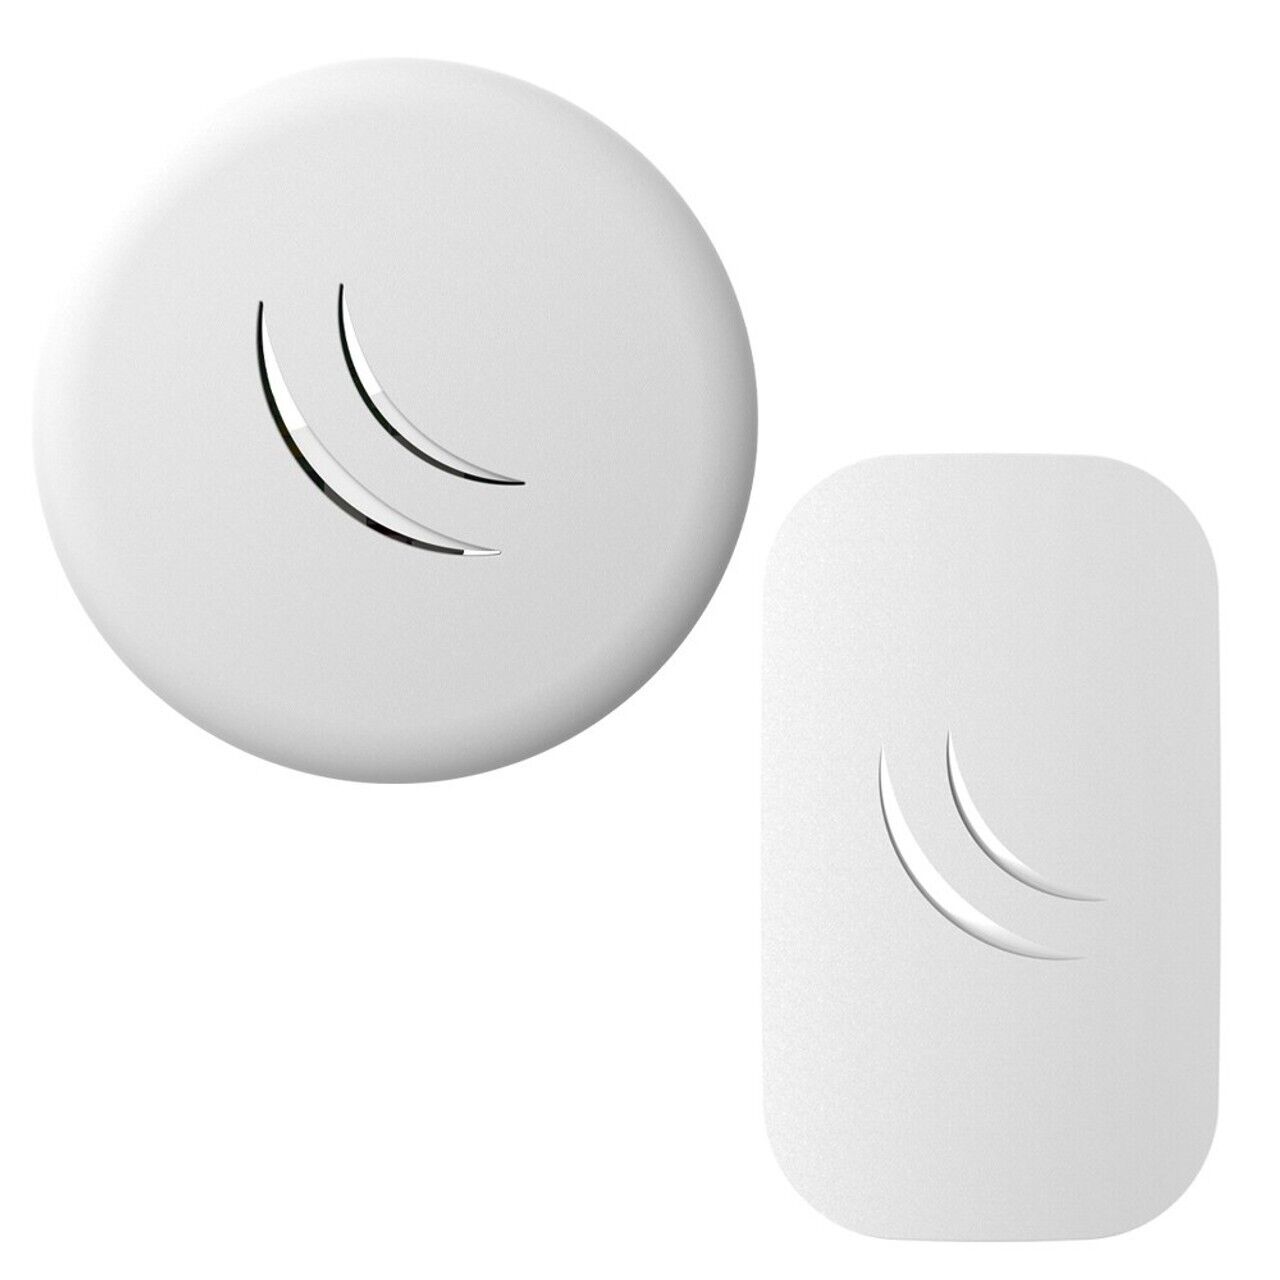 Mikrotik cAP lite RBcAPL-2nD Wall/Ceiling Access Point Dual Chain 2.4GHz